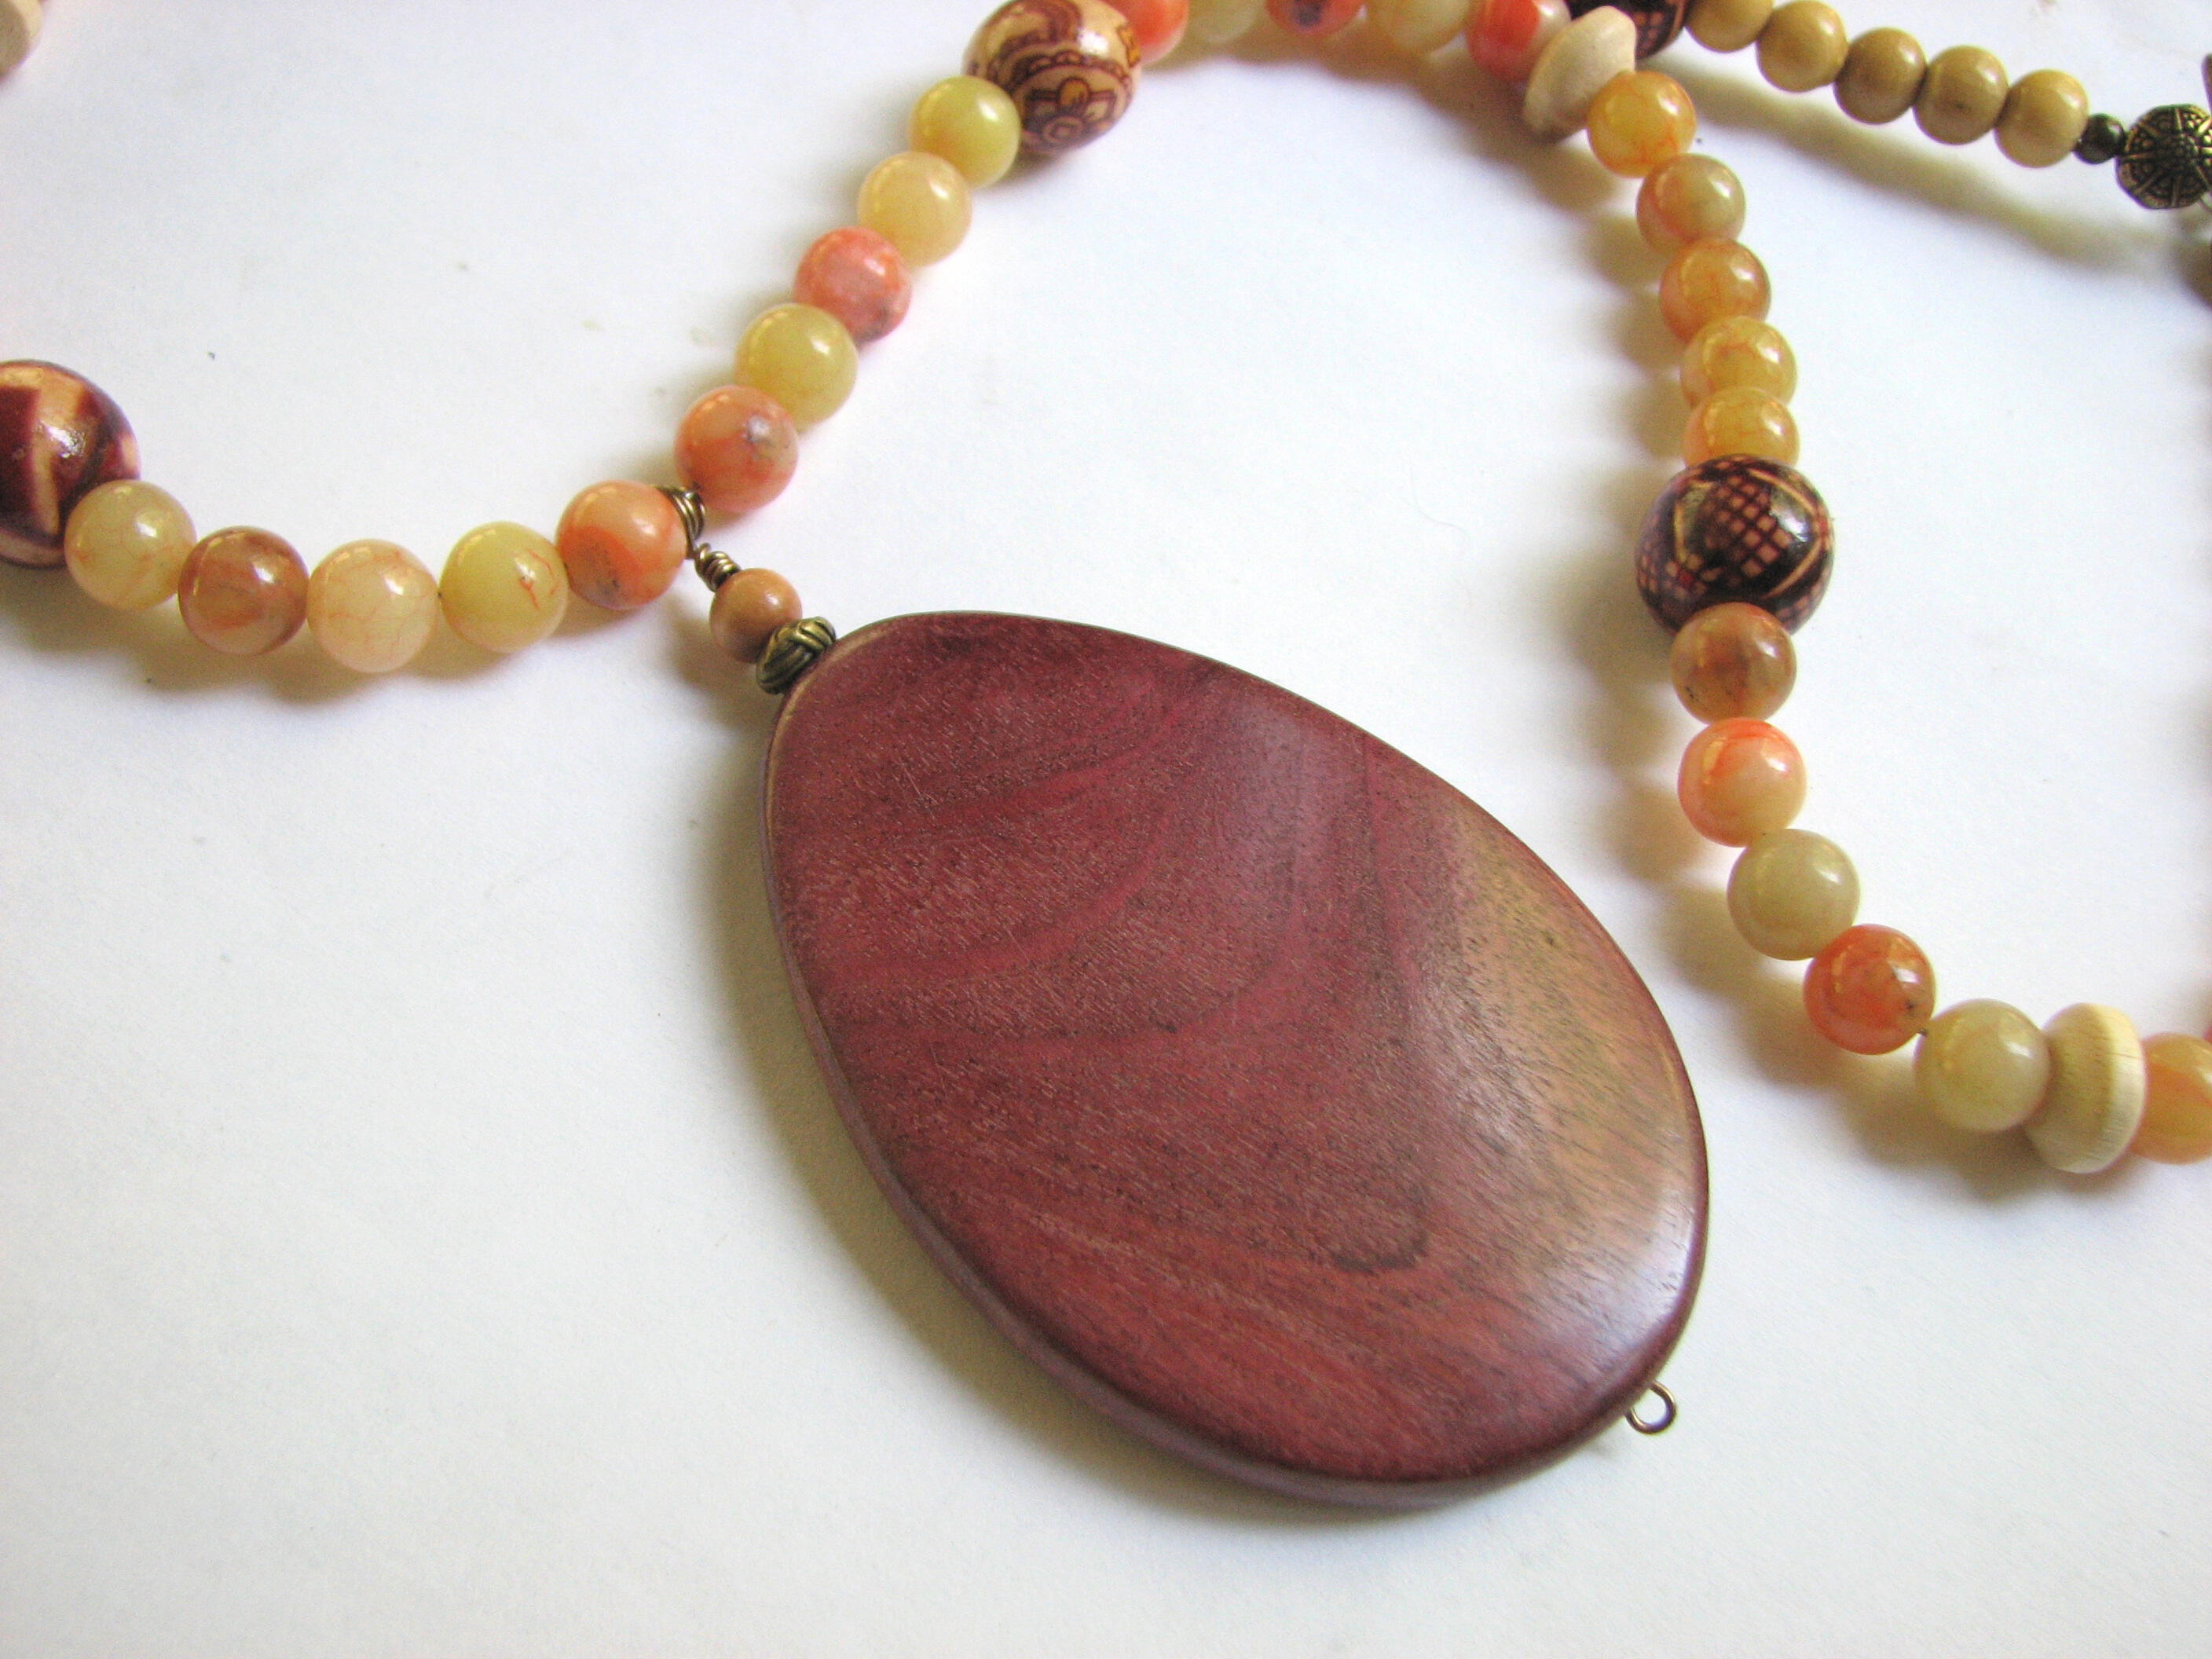 Large pendant of natural Costa Rican Purple Heart wood.